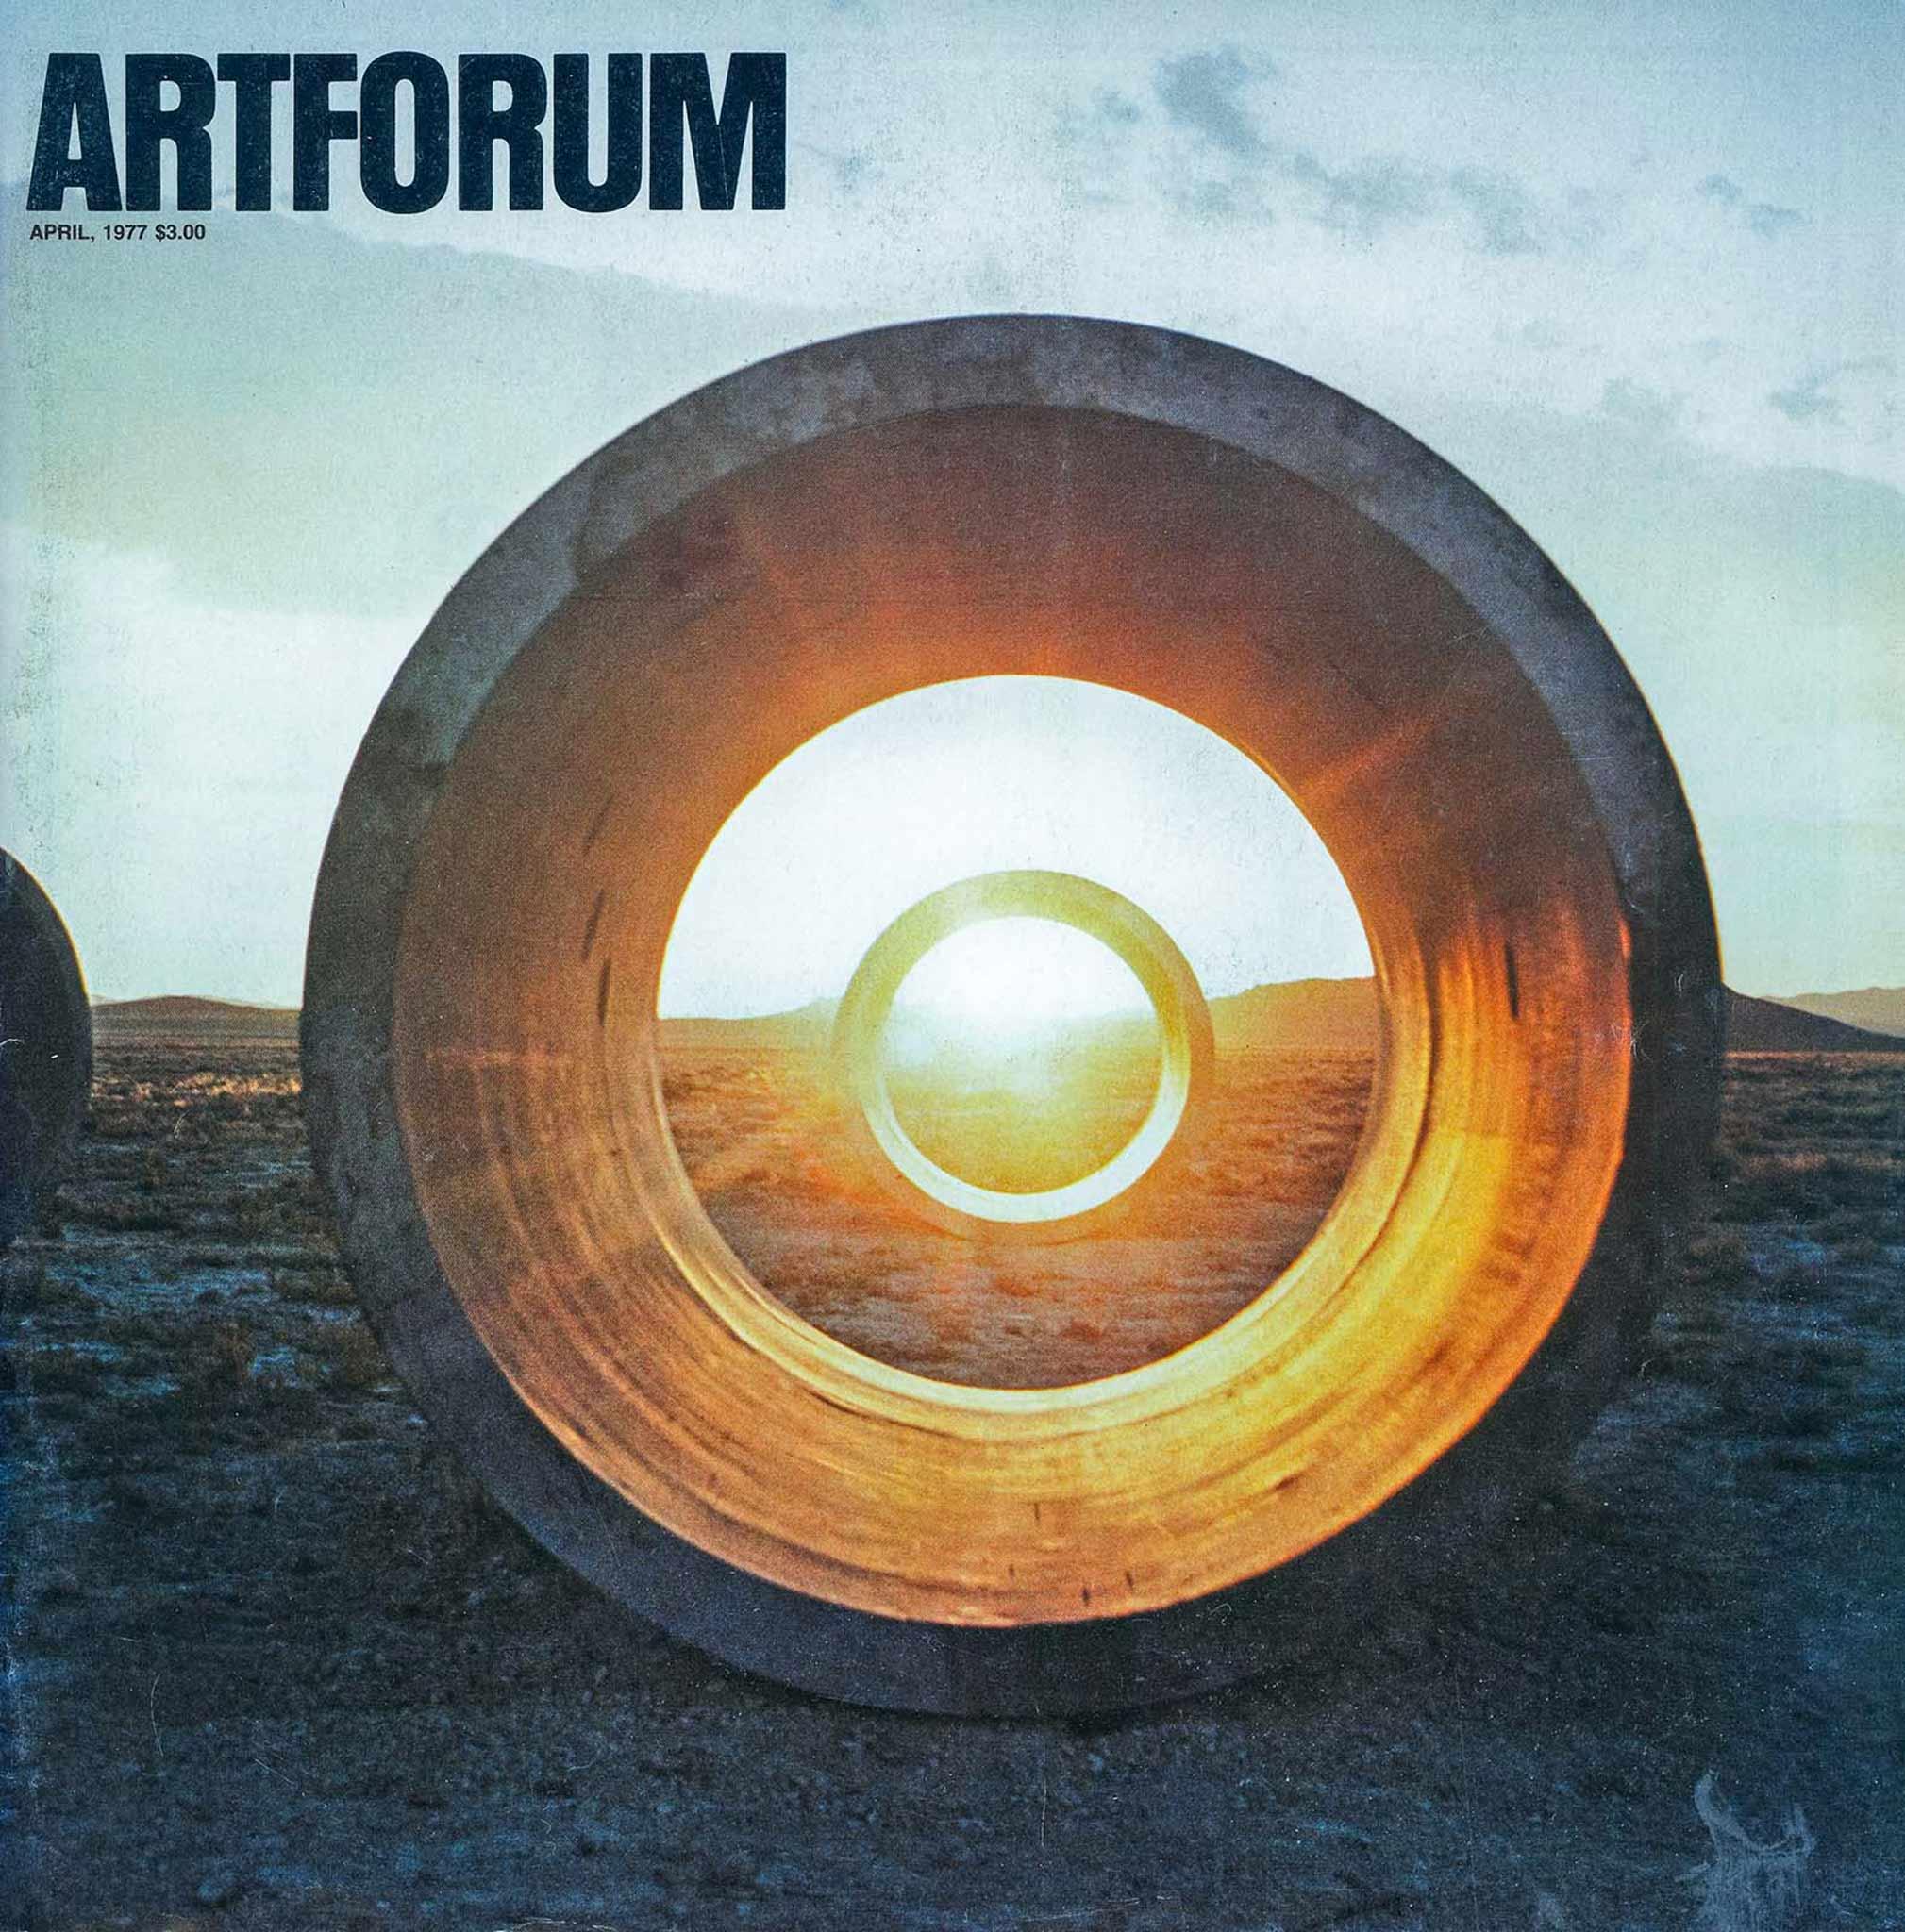 Magazine cover with the artforum logo in black in the upper left corner.  Cover image of two large concrete tunnels in line in the Utah desert, with the sun setting behind the second tunnel.